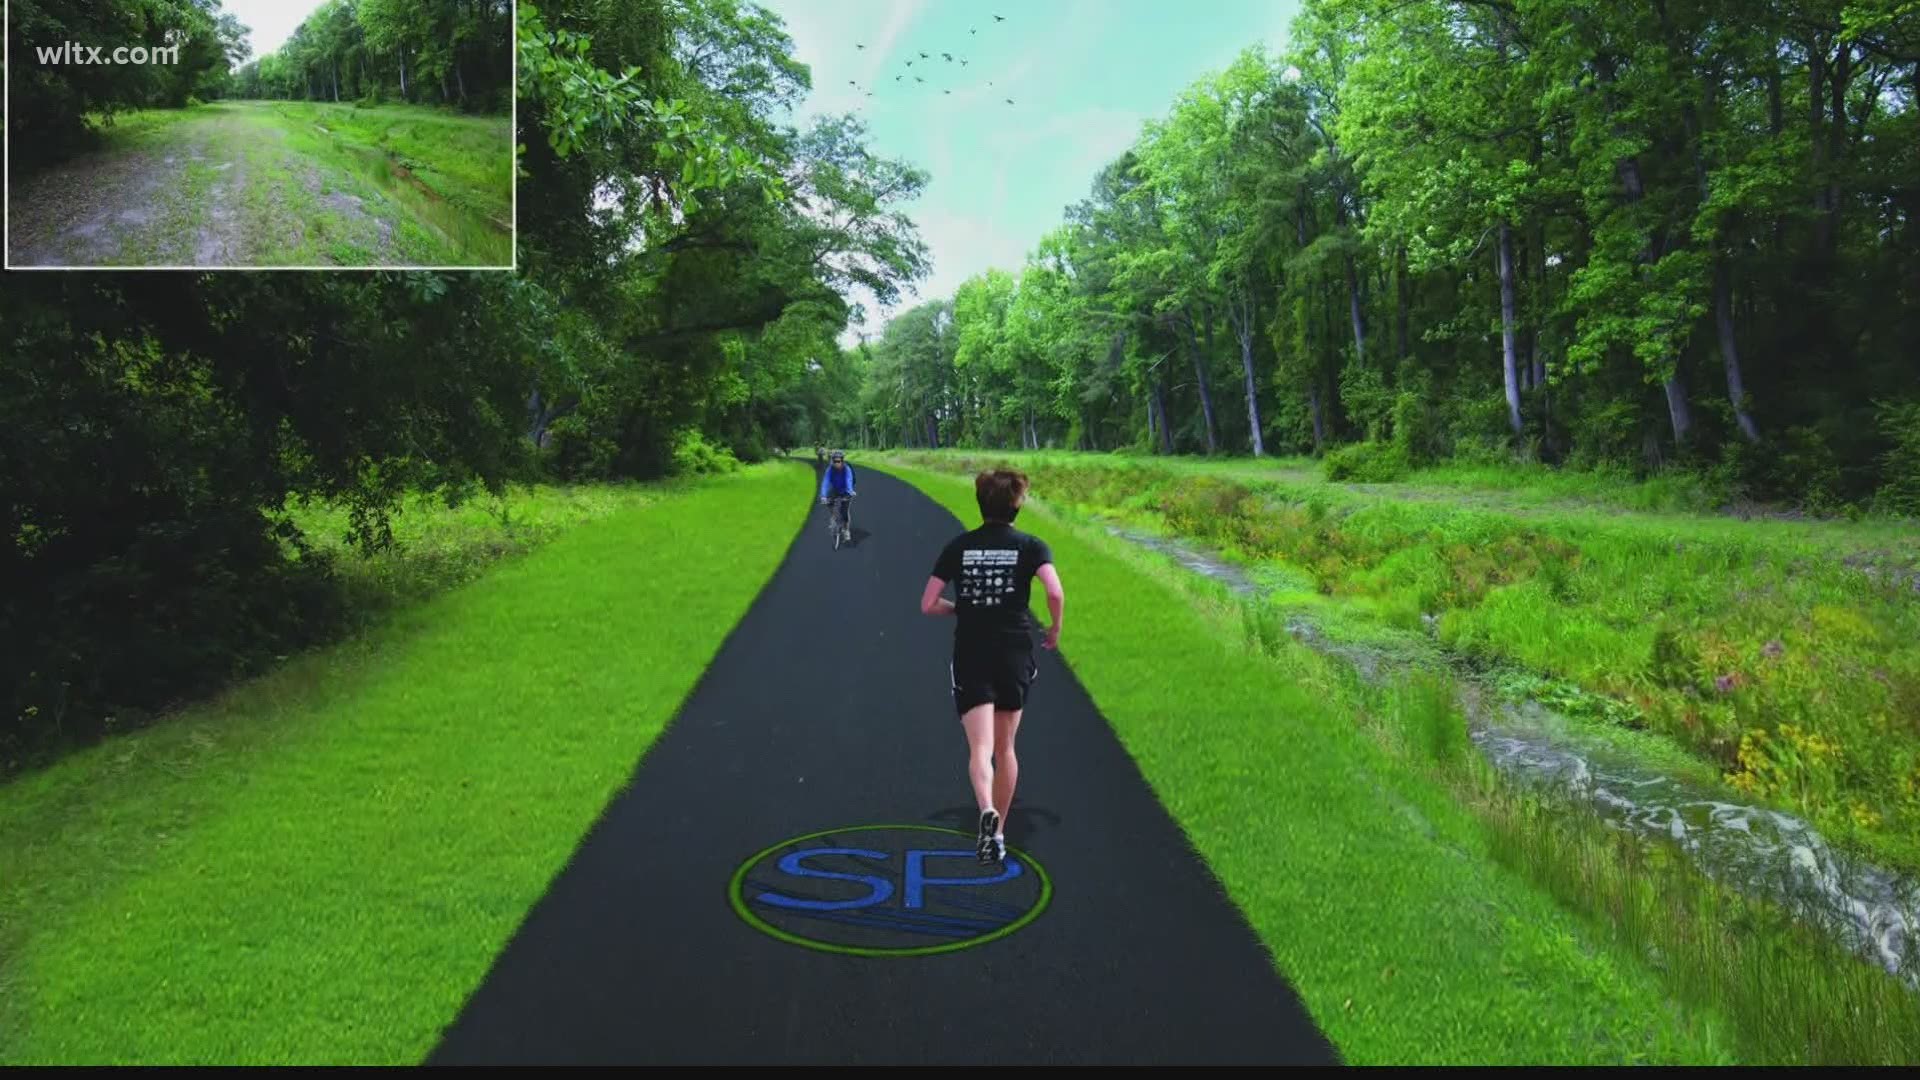 The 3.4 mile walking trail call 'Shot Pouch Greenway' will connect Dillon Park and Swan Lake.